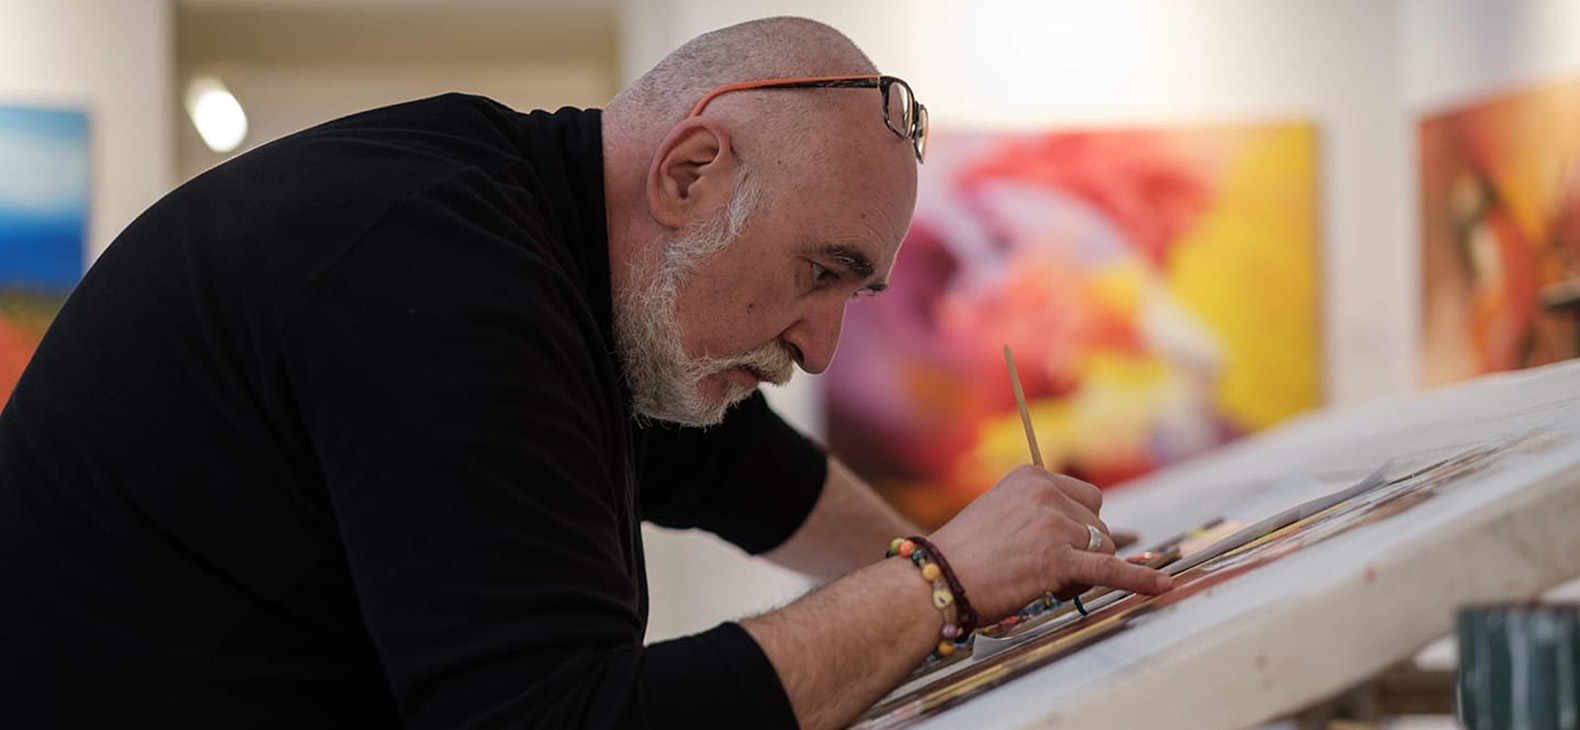 Schafhof Residency Program; Artists 2022: Michele Gomez. Italian artist Michele Gomez is seen working on one of his paintings. He can be seen in side profile leaning over the painting.